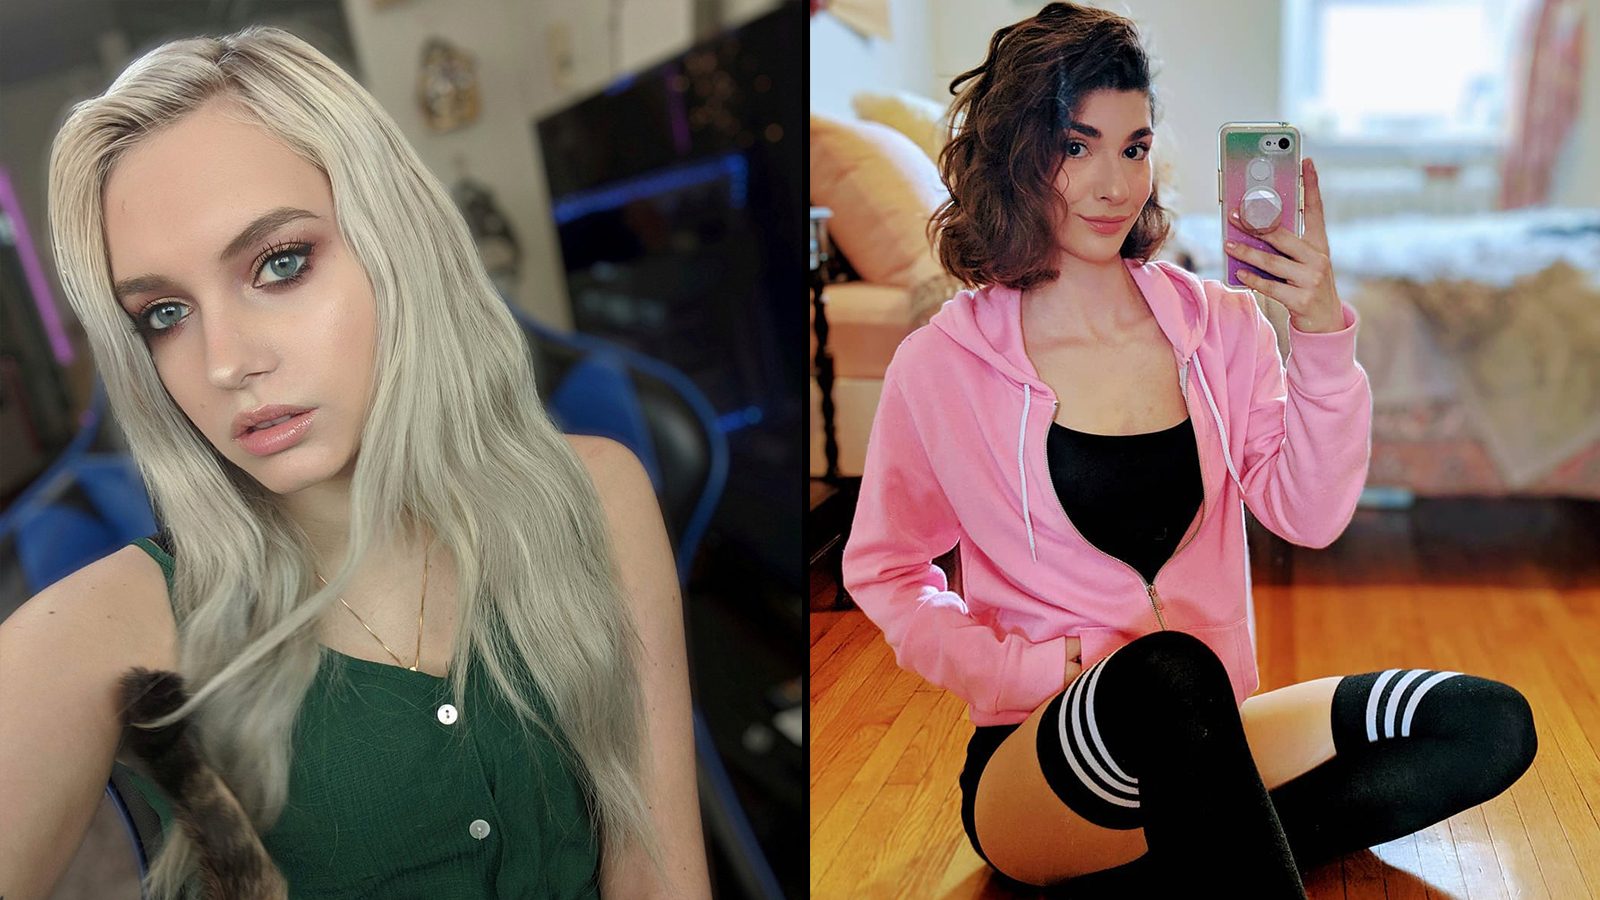 Novaruu Disgusted By Fellow Twitch Streamers Arrogant Outburst About Revealing Clothing